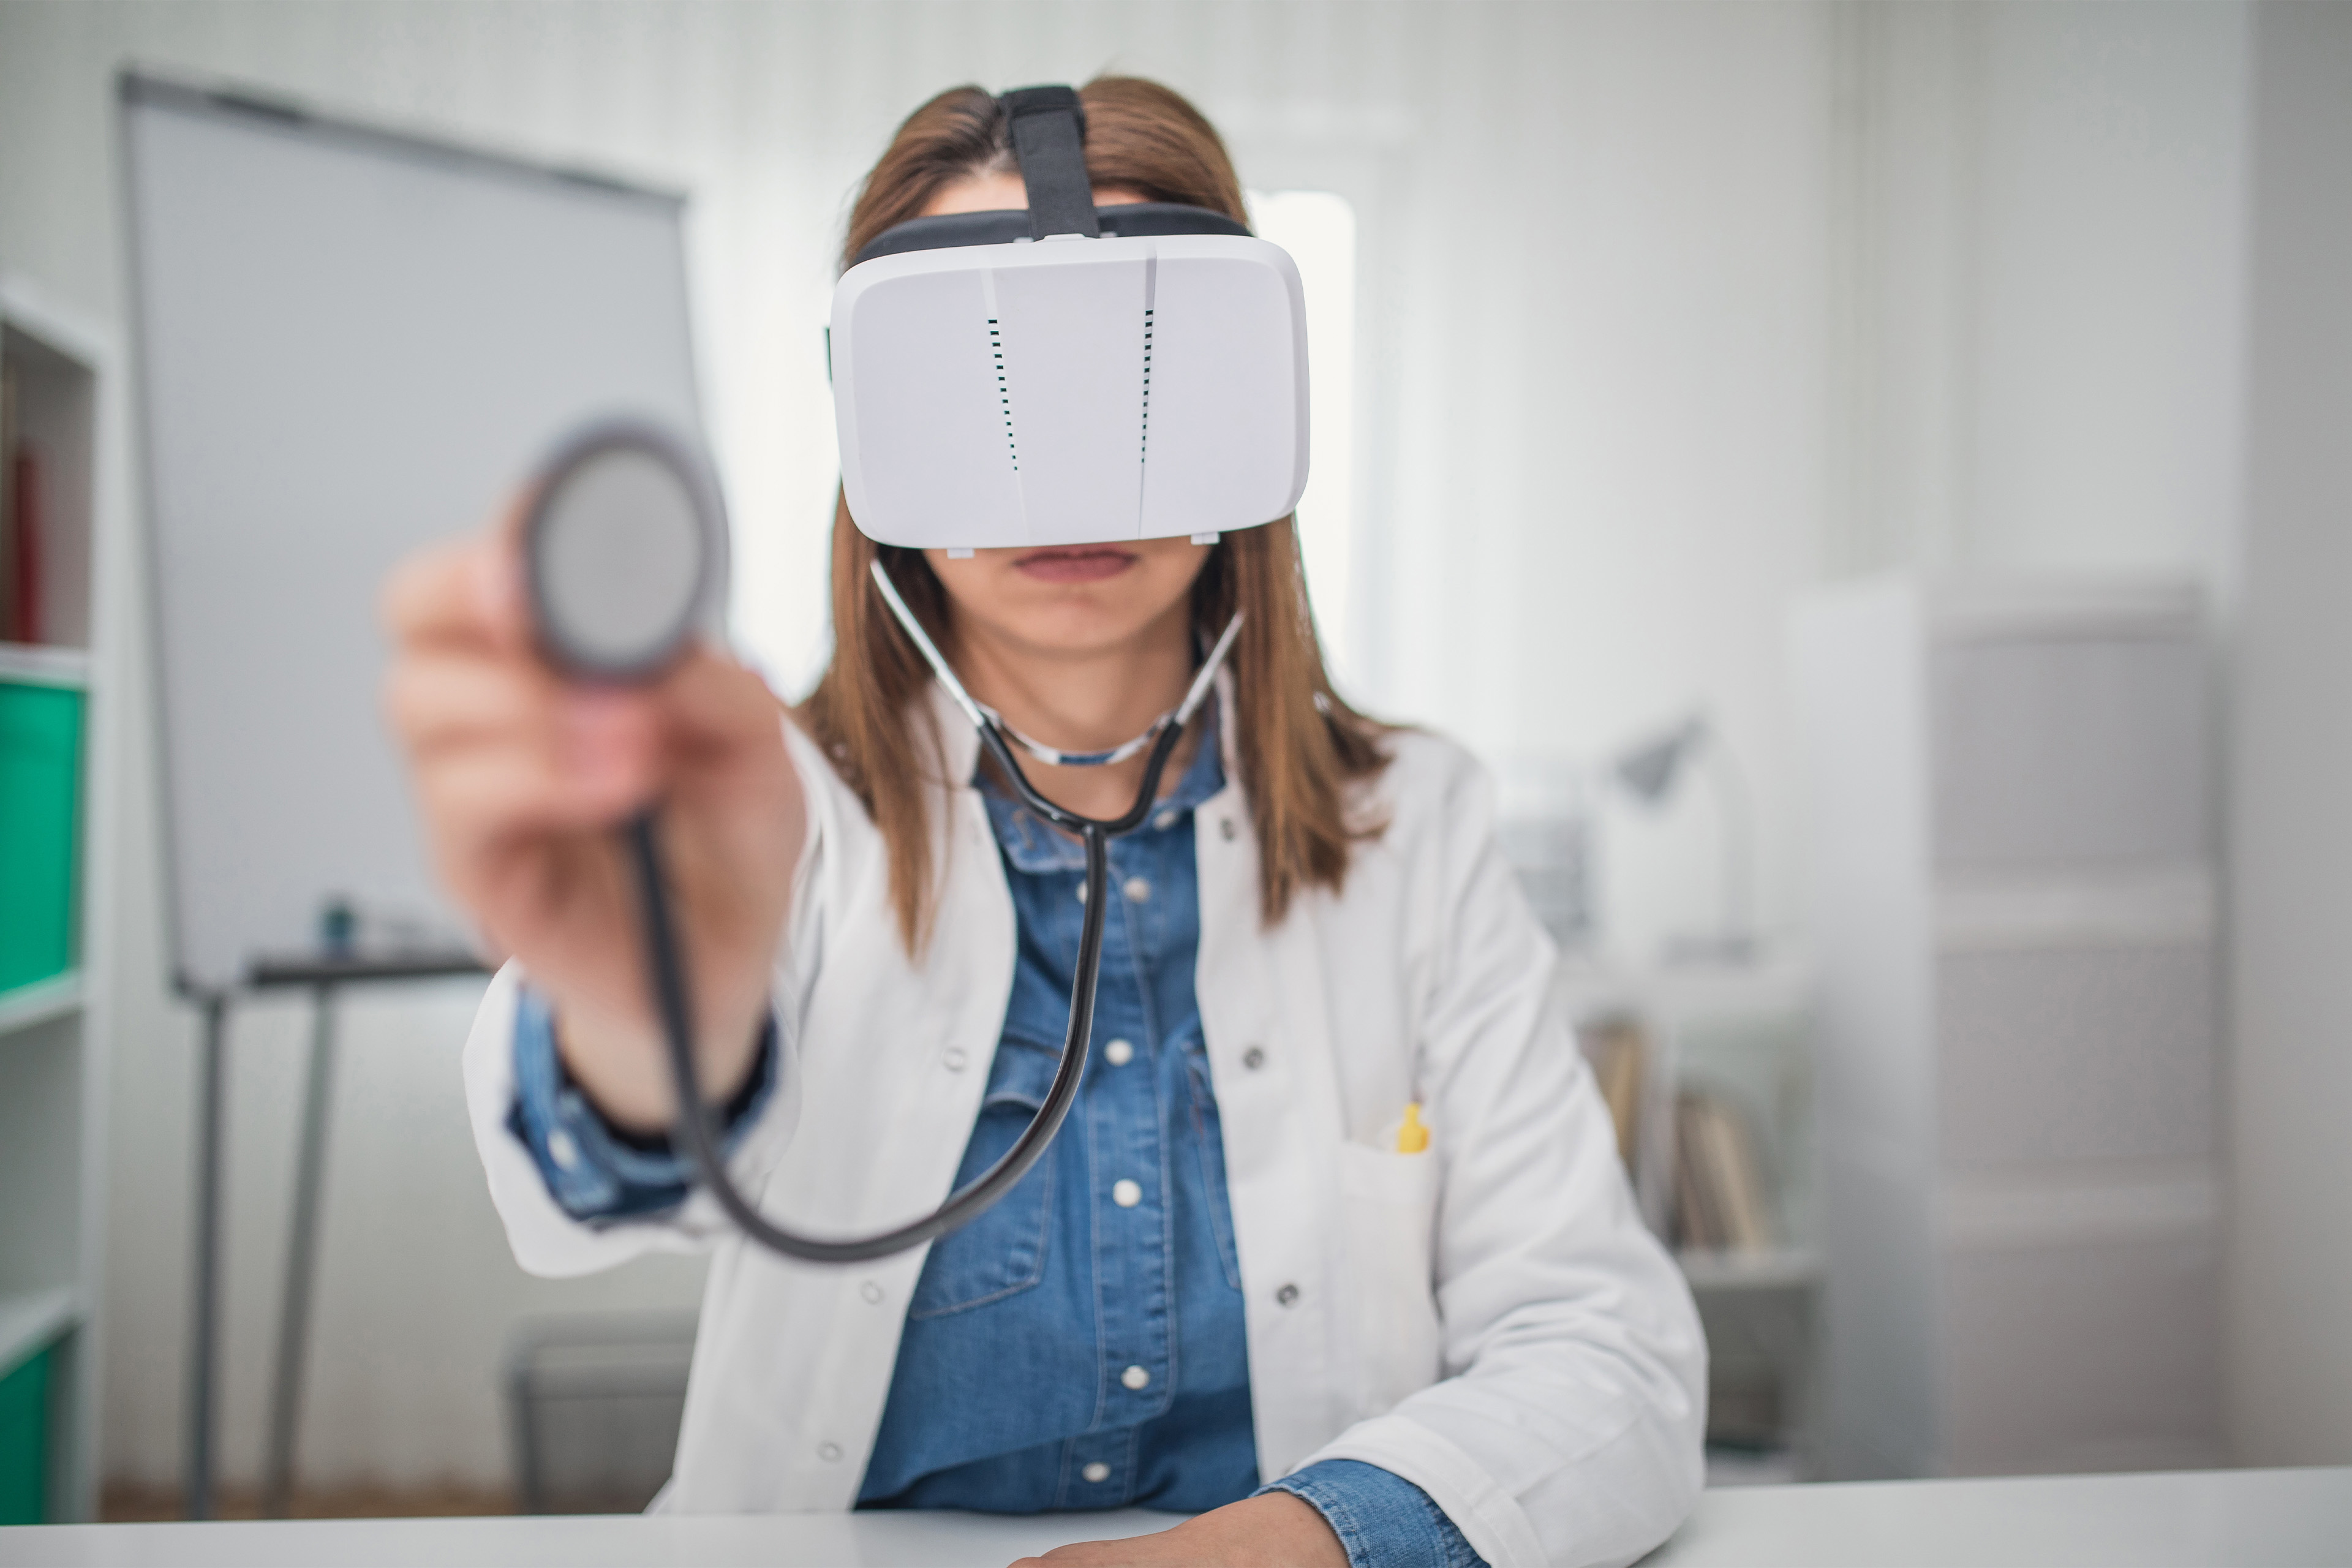 Healthcare in the metaverse? It might be closer than you think 